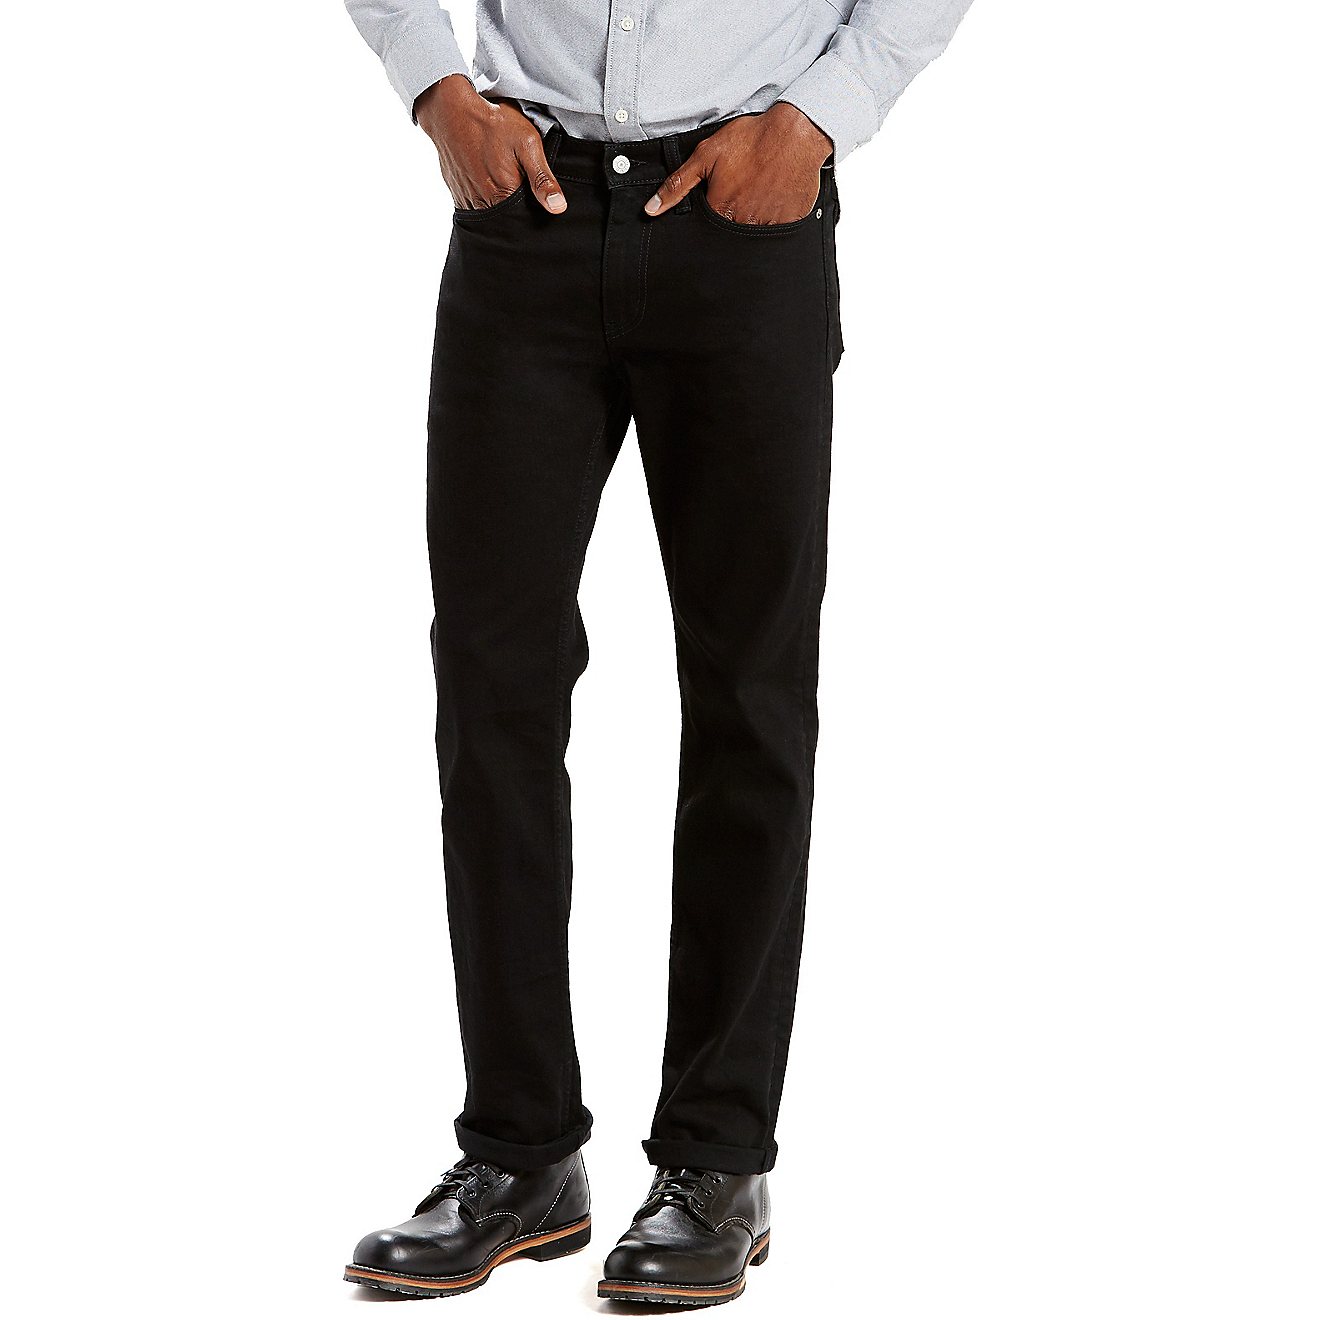 Levi's Men's 514 Straight Fit Jeans | Free Shipping at Academy